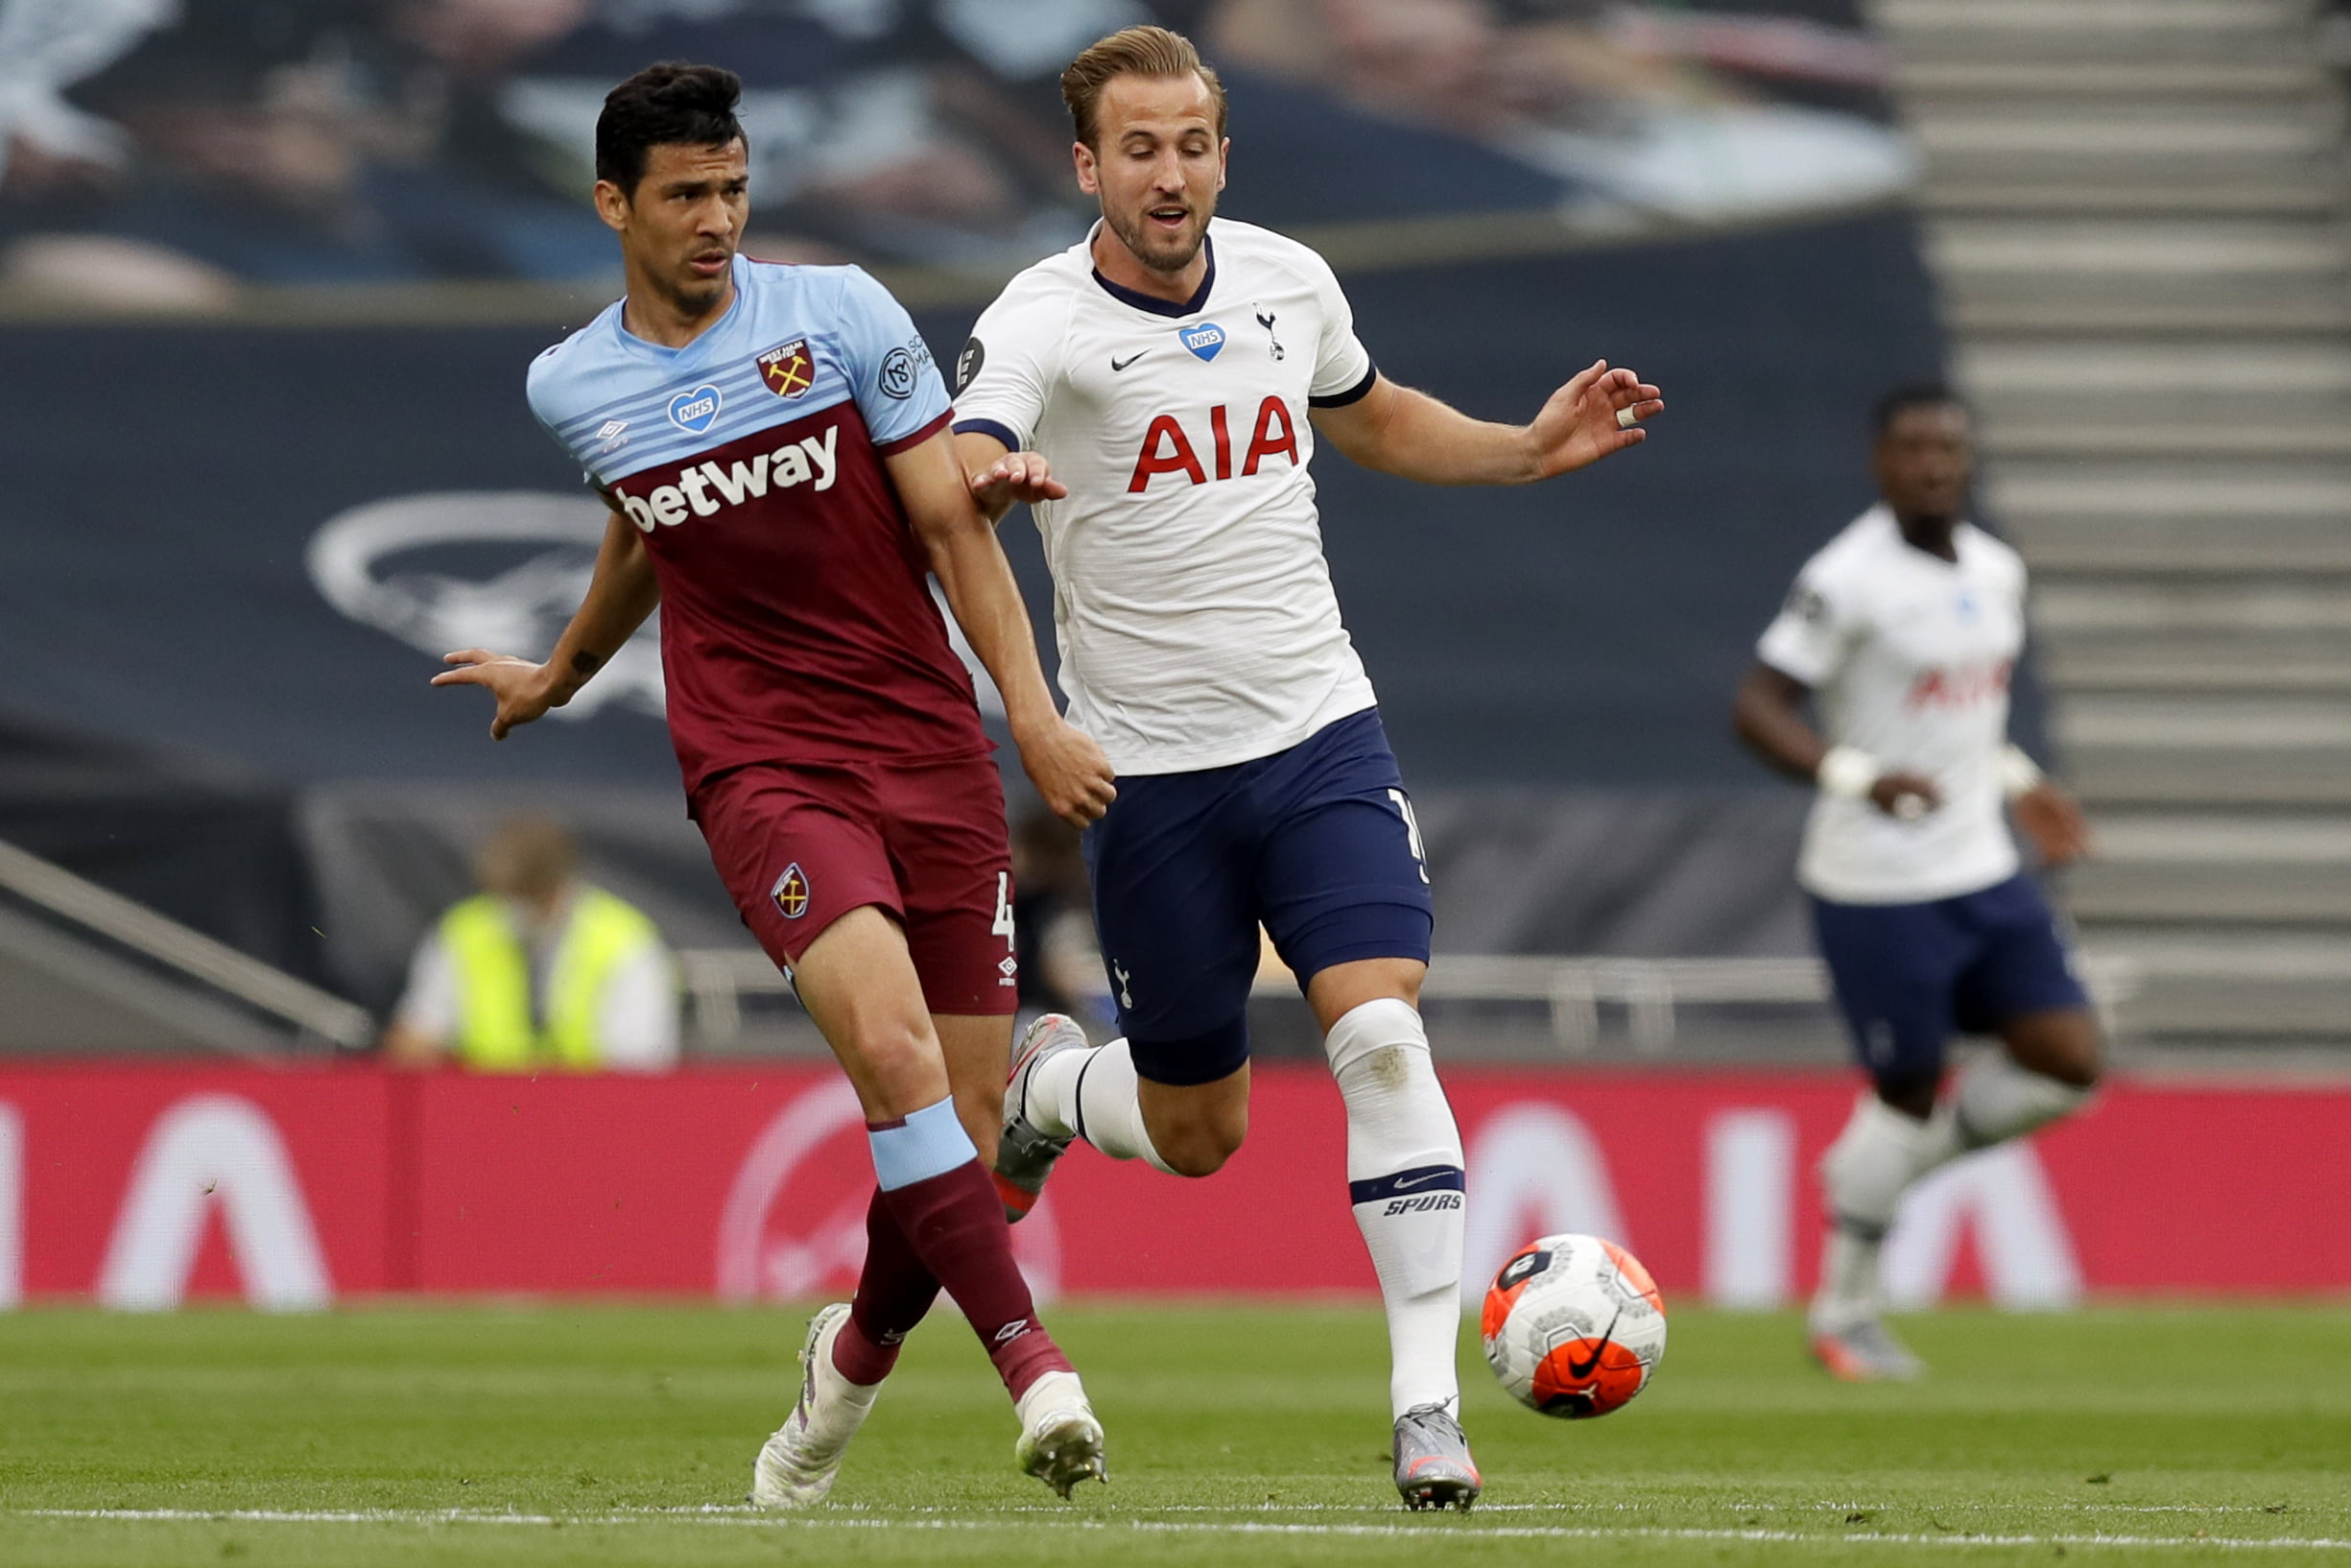 Bournemouth Vs Tottenham Hotspur Tactical Preview (Tottenham's Harry Kane in action in the picture)